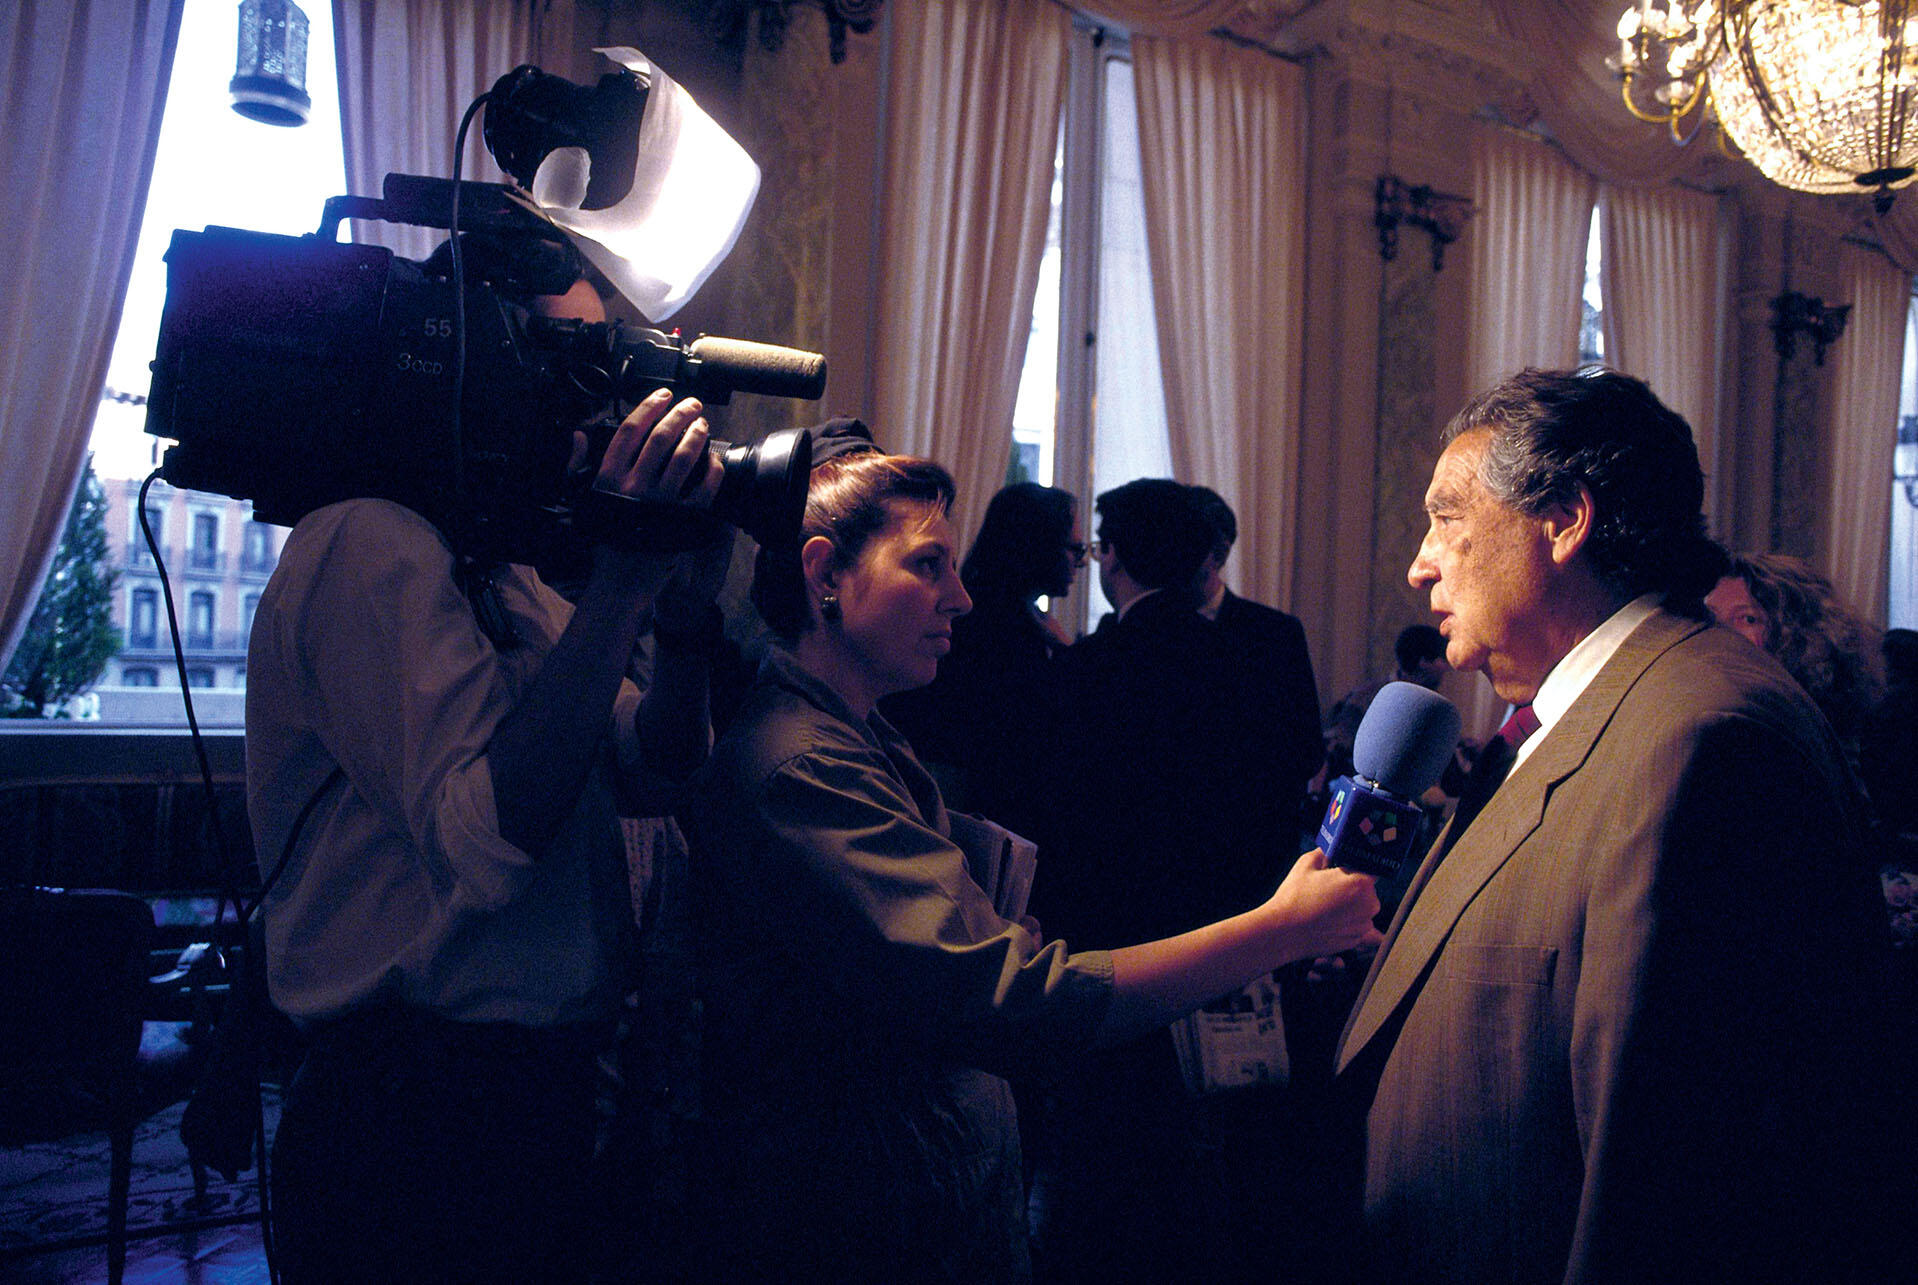 Octavio Paz gives a television interview in a crowded room. (Photo by Pepe Franco/Cover/Getty Images.)